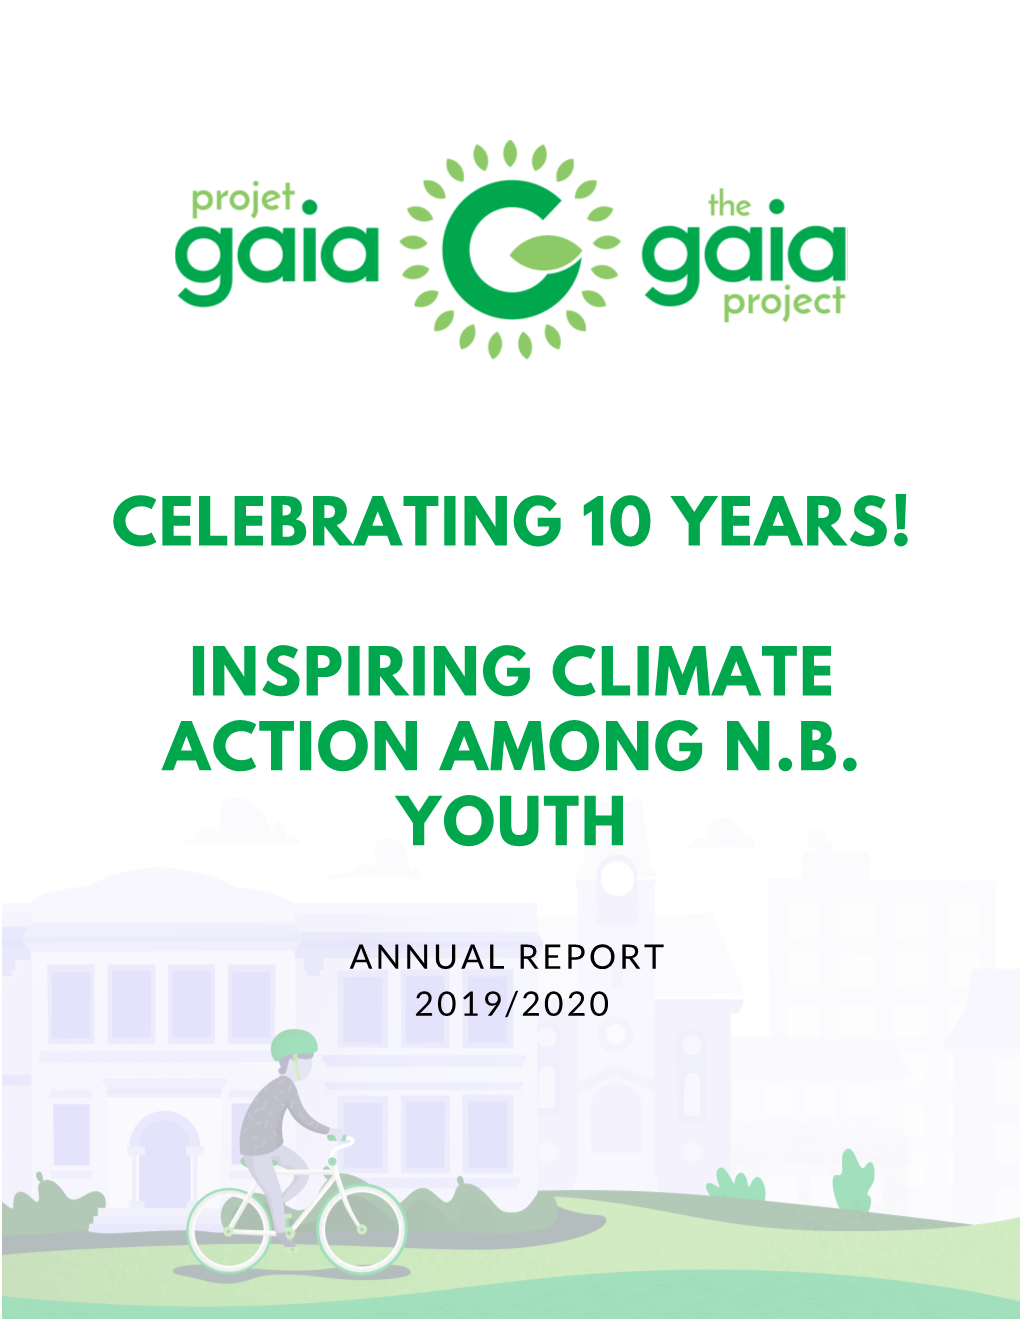 Celebrating 10 Years! Inspiring Climate Action Among N.B. Youth